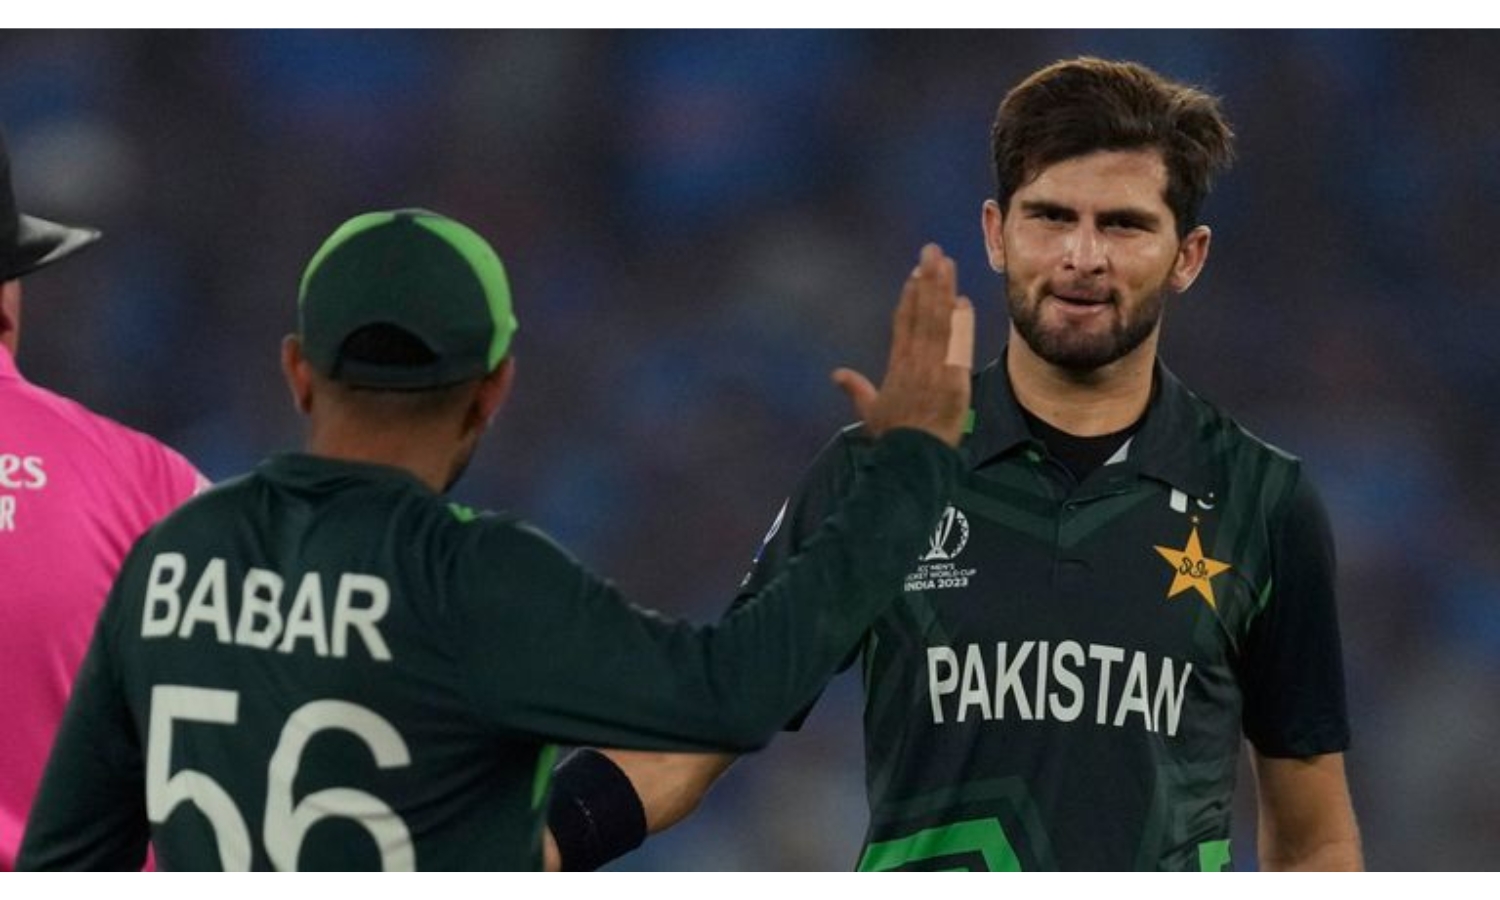 Babar Azam Appointed Pakistan's White-Ball Captain; Shaheen Afridi Ousted After One Series